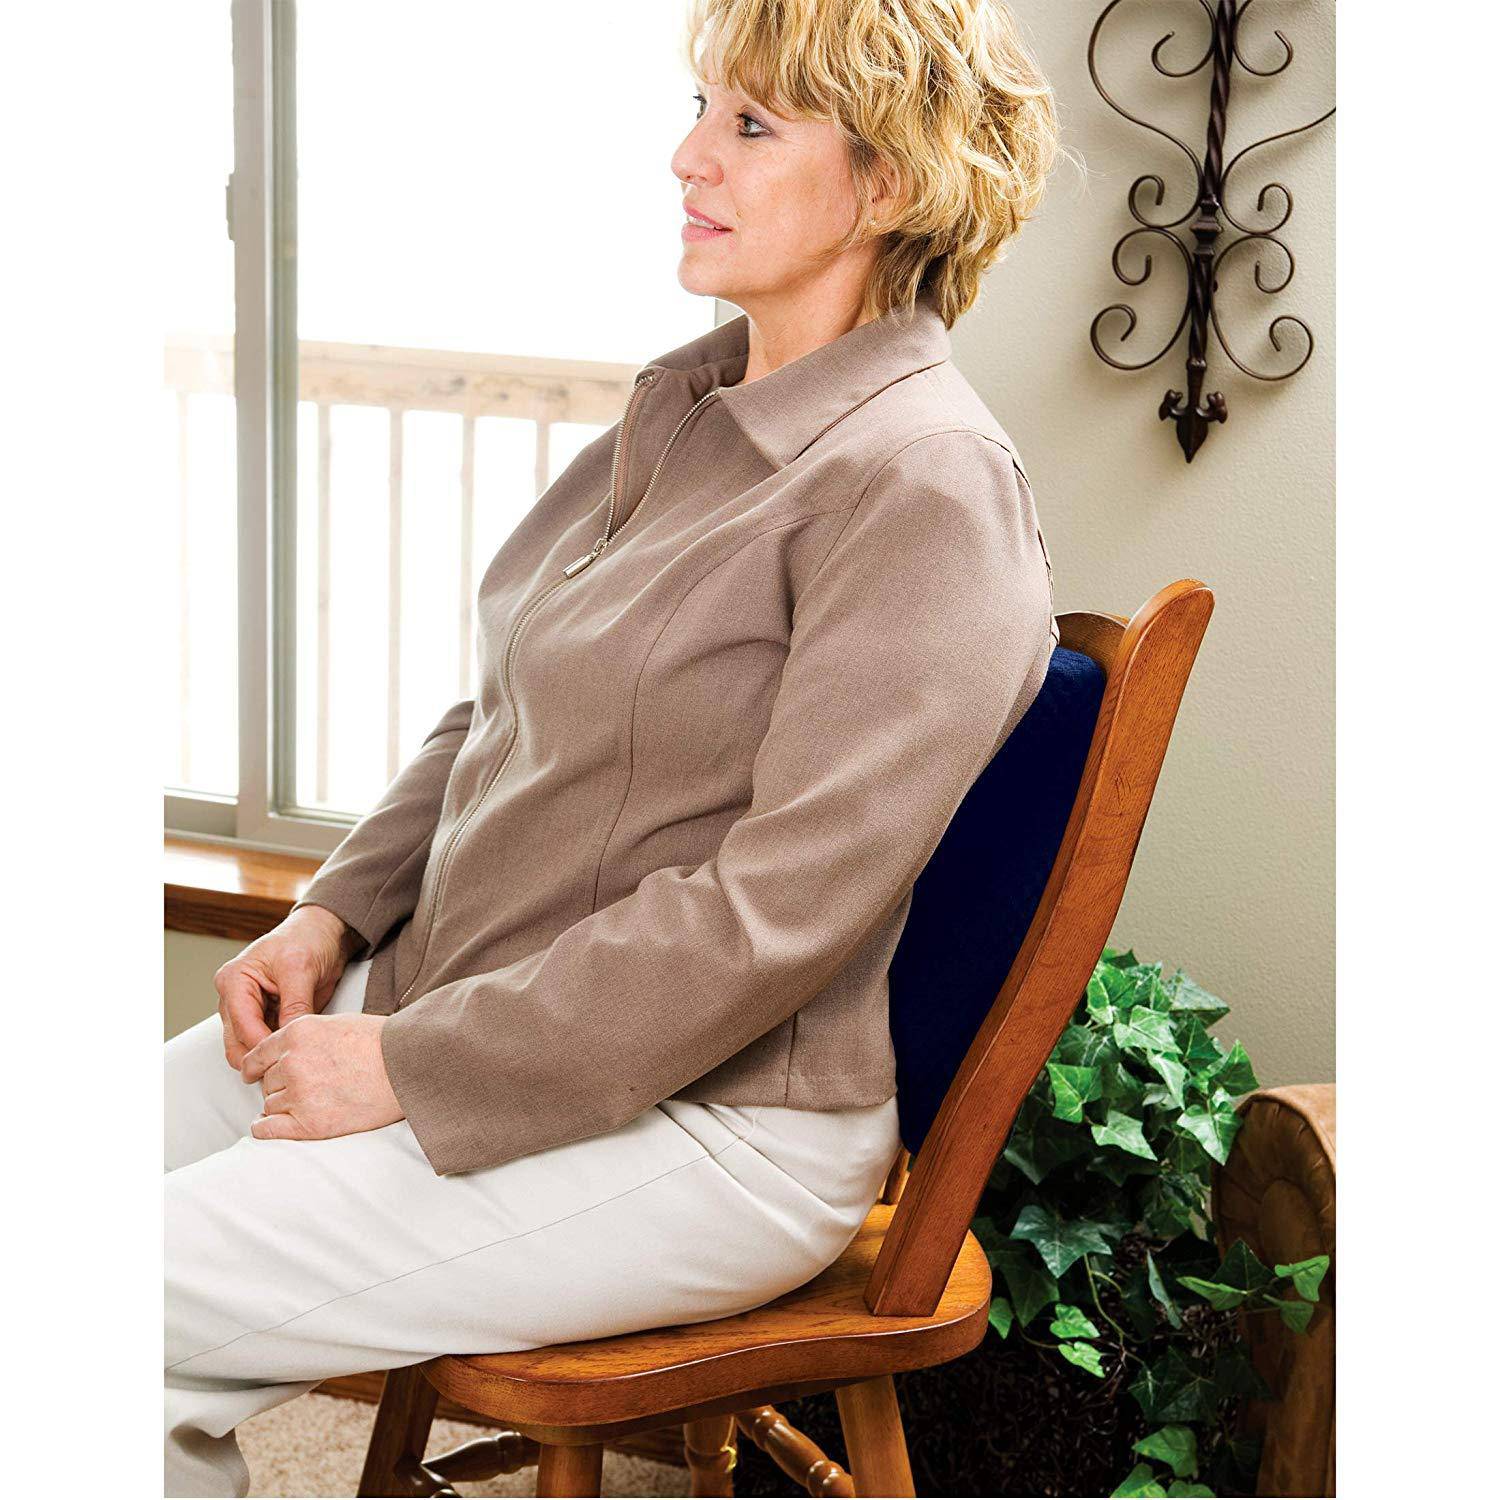 Back support Cushions, Lumbar pillow. Versatile use for sofa or